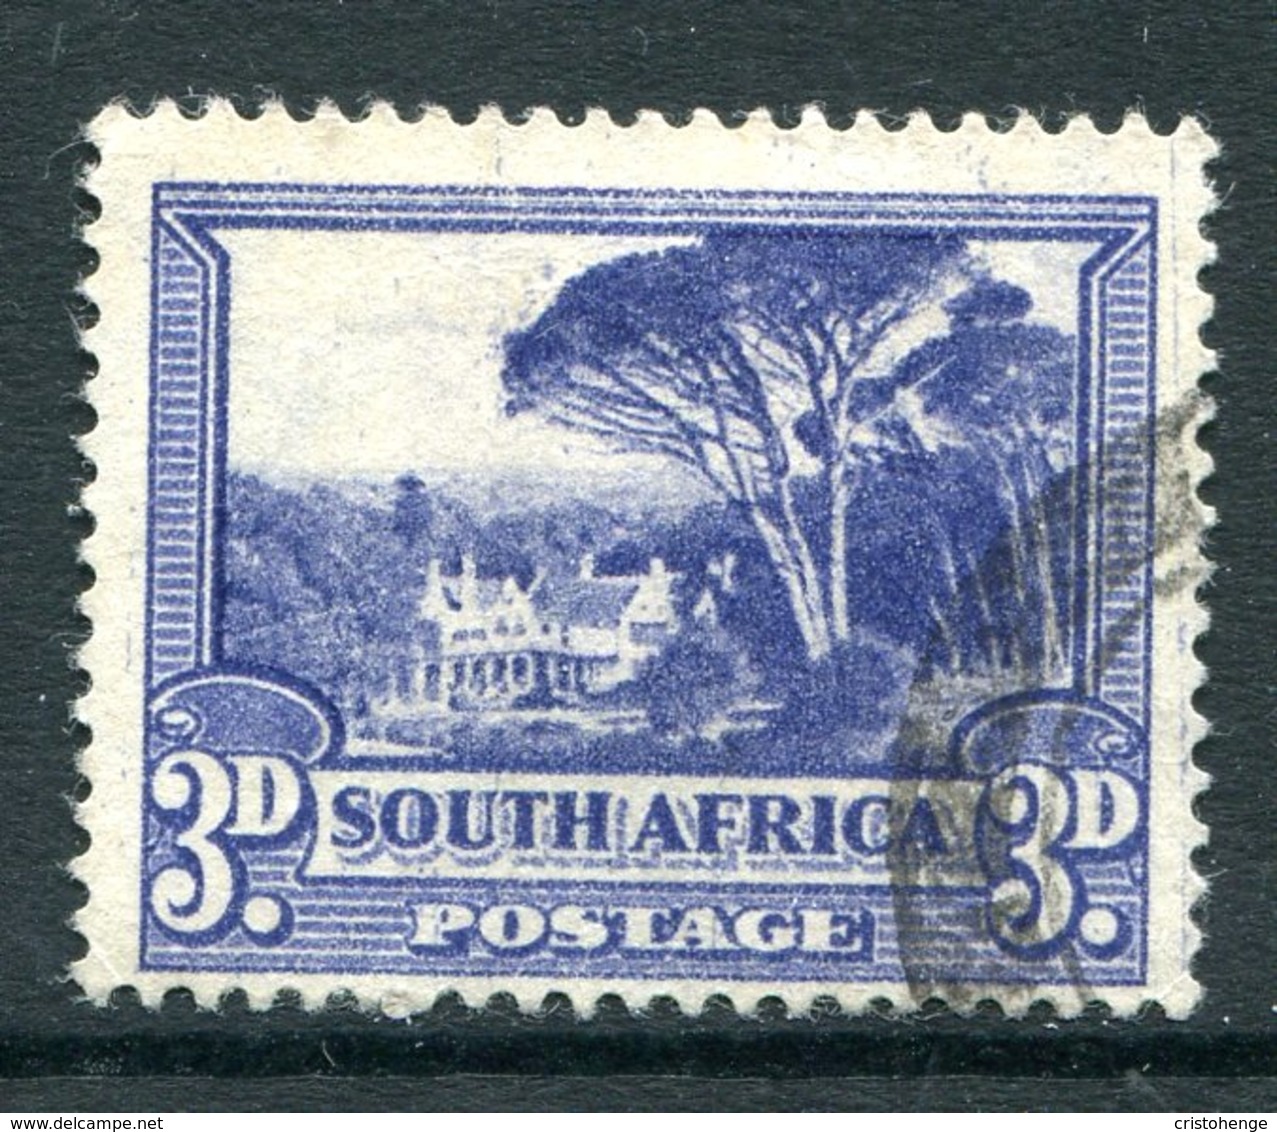 South Africa 1947-54 Screened Printing - 3d Groot Schuur - Dull Blue - Used (SG 117) - Unused Stamps